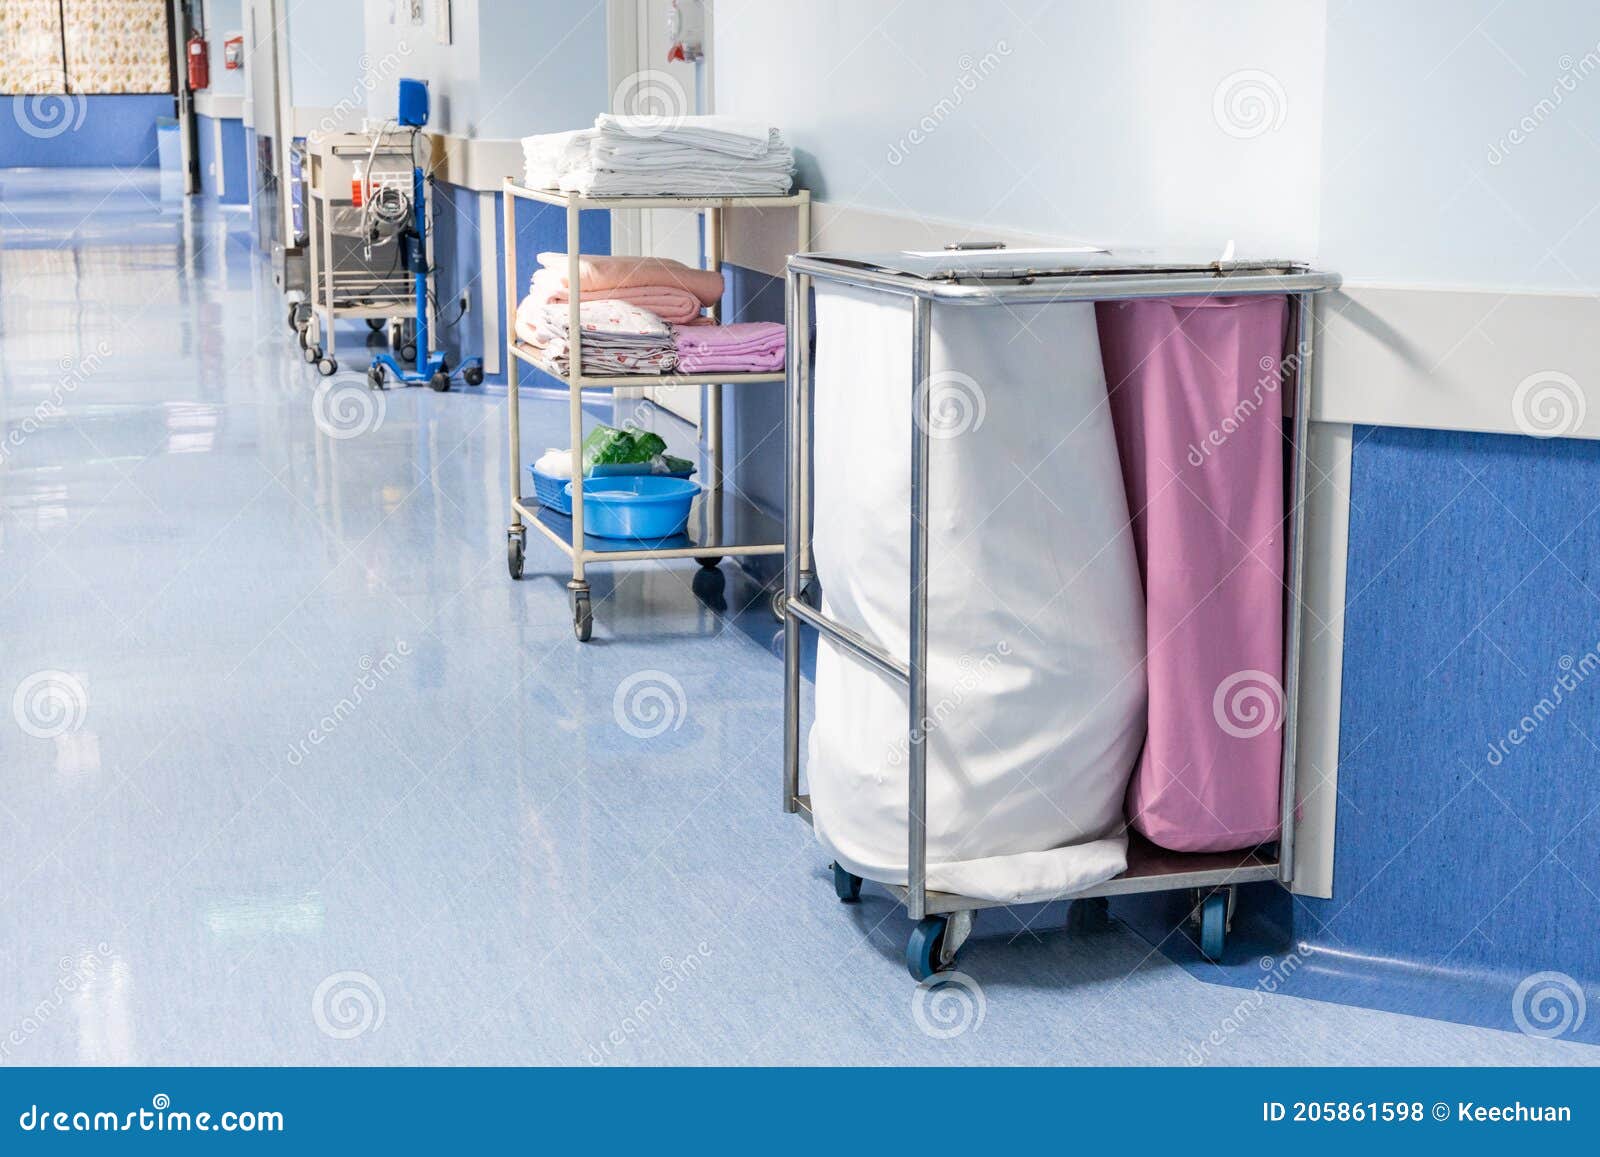 Hospital Dirty Linen Trolley Stainless Steel With Two Bags